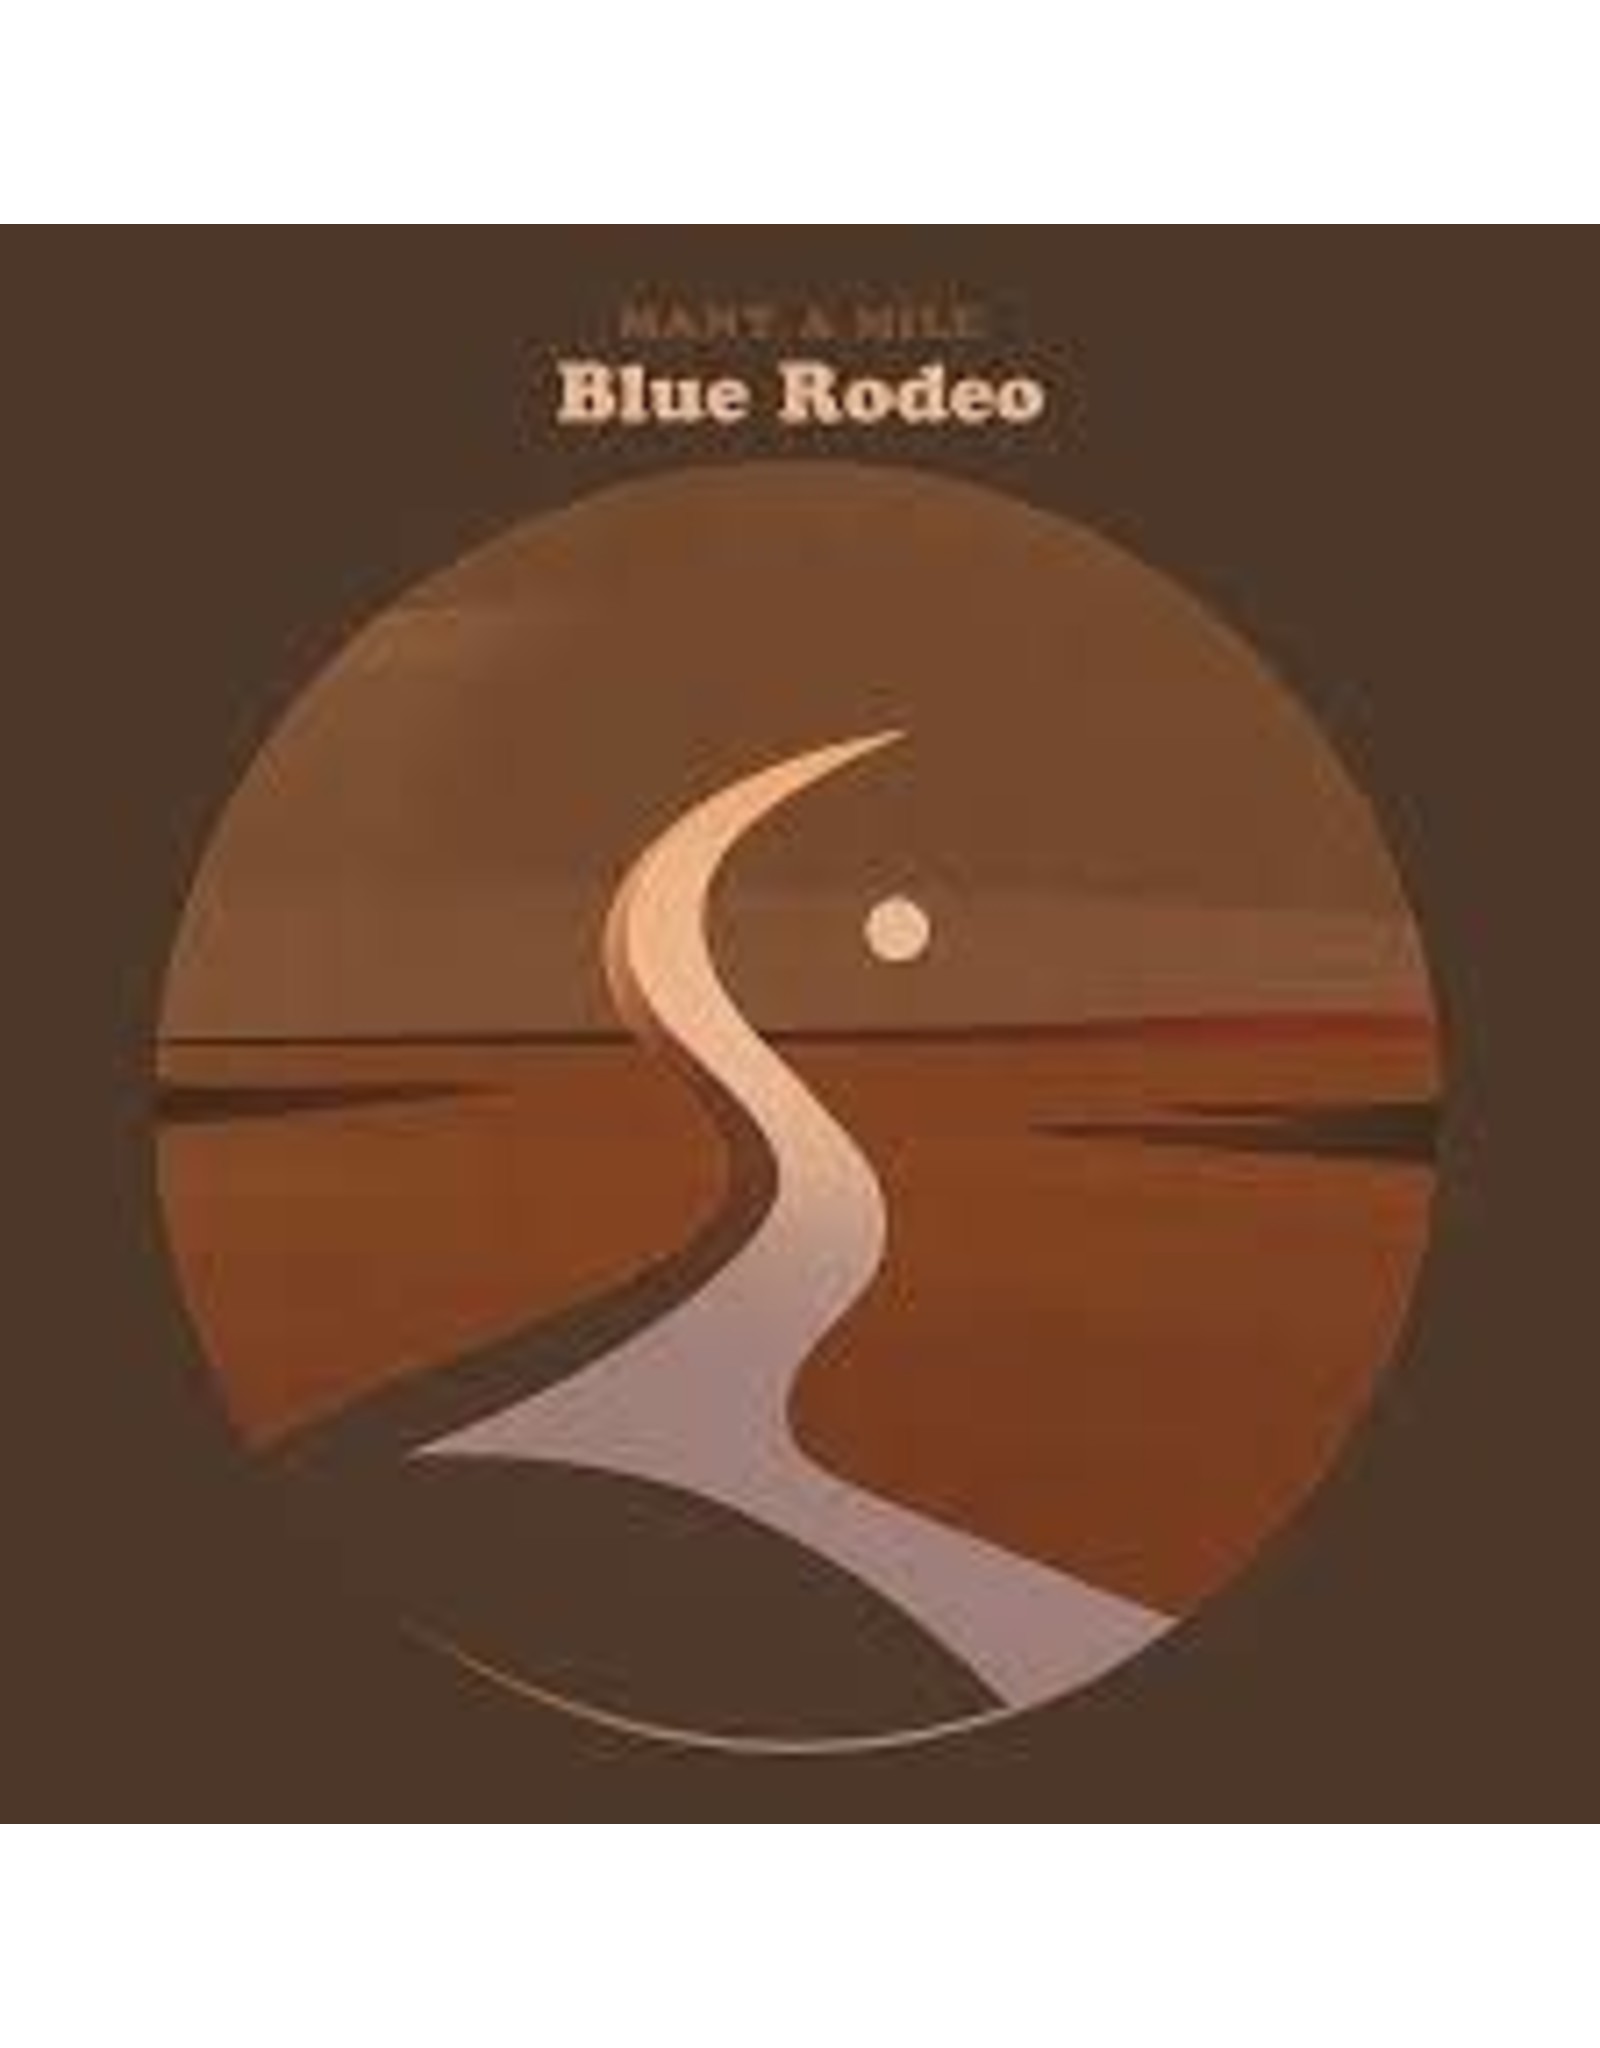 Blue Rodeo - Many A Mile LP